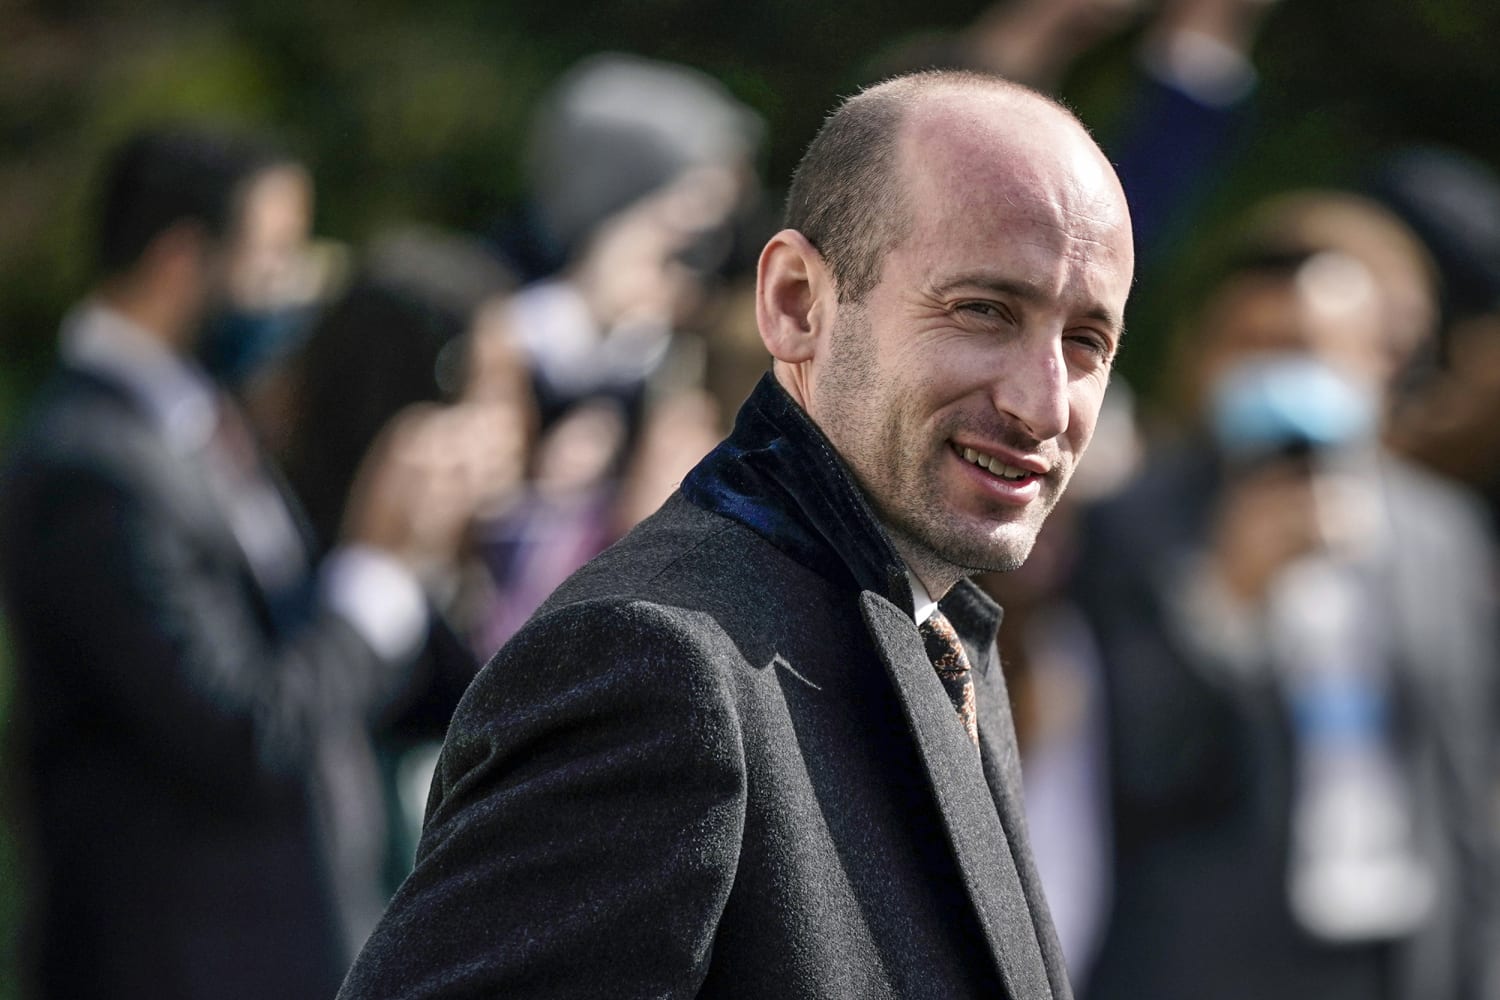 Jan. 6 committee subpoenas Stephen Miller, Kayleigh McEnany and other top ex-Trump aides